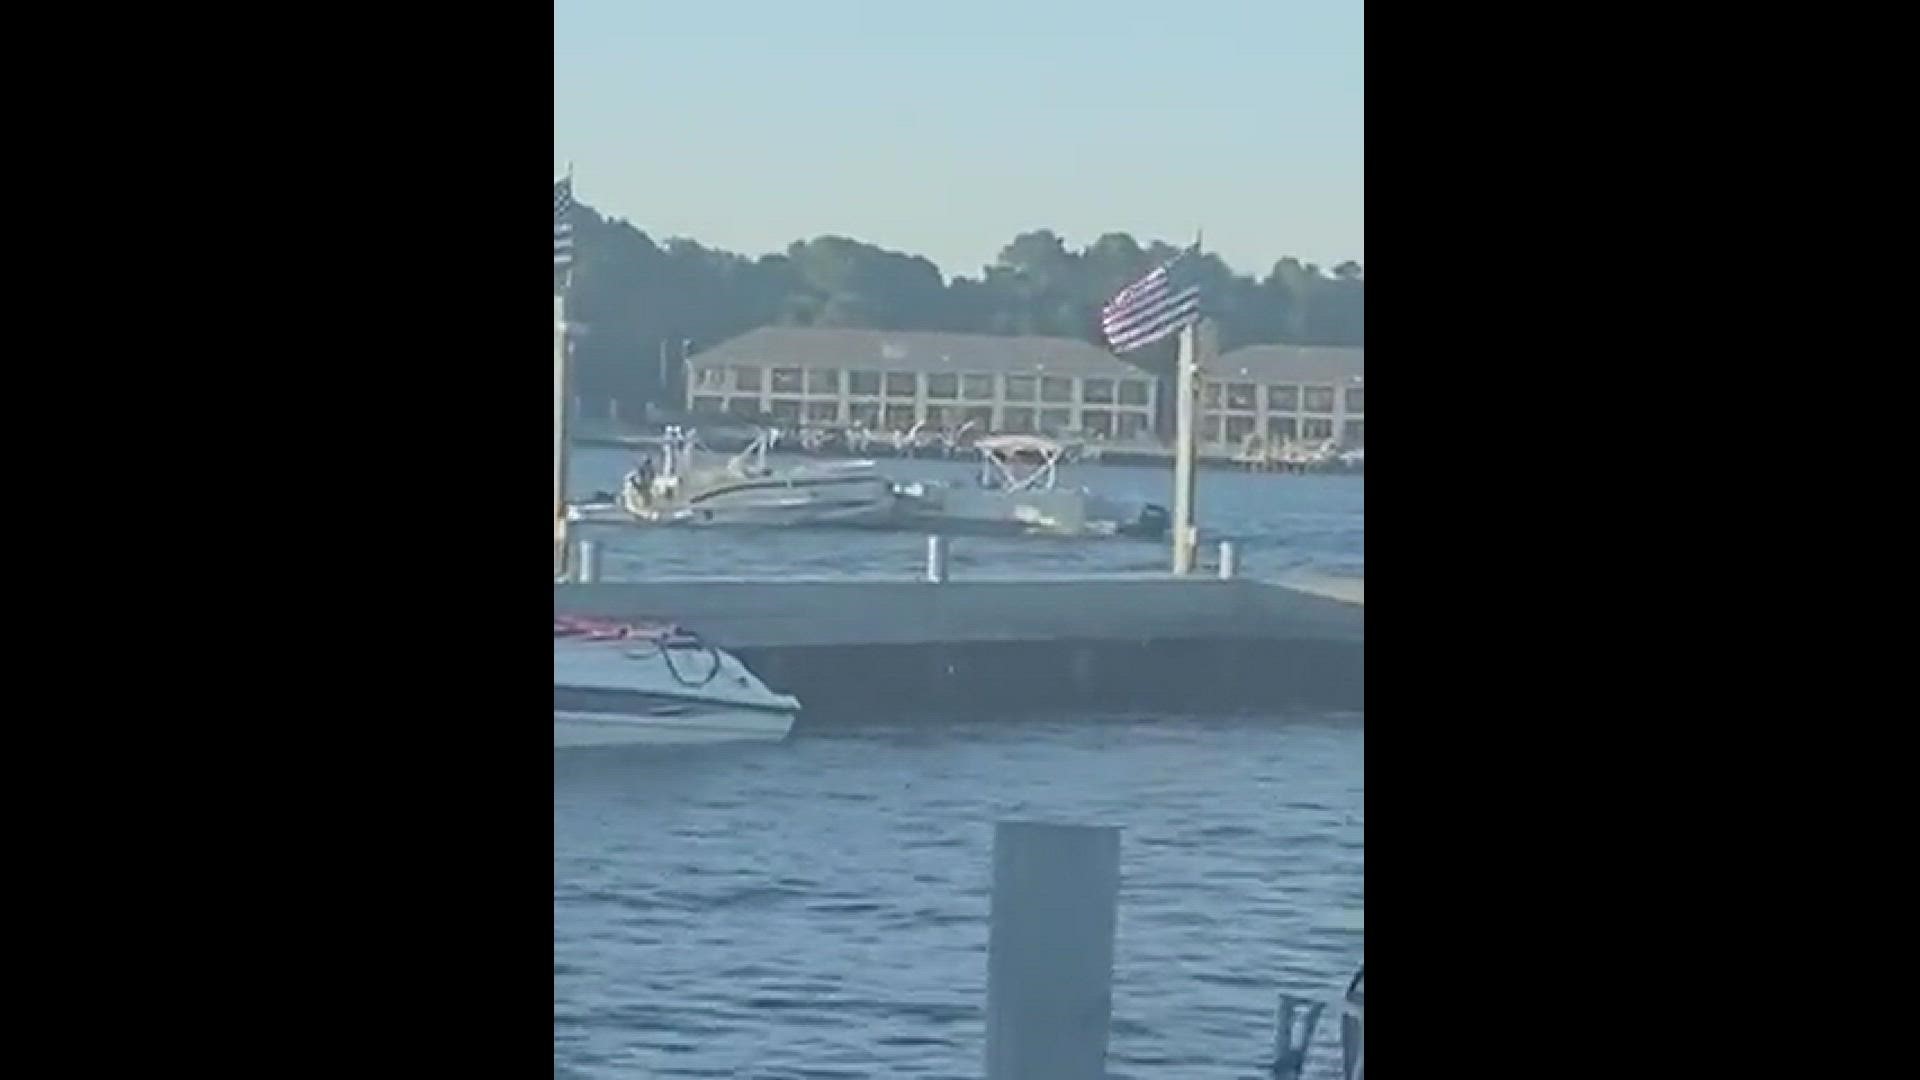 A boating accident occurred on the lake outside of Conroe Lake House restaurant.
Credit: Felicity P.